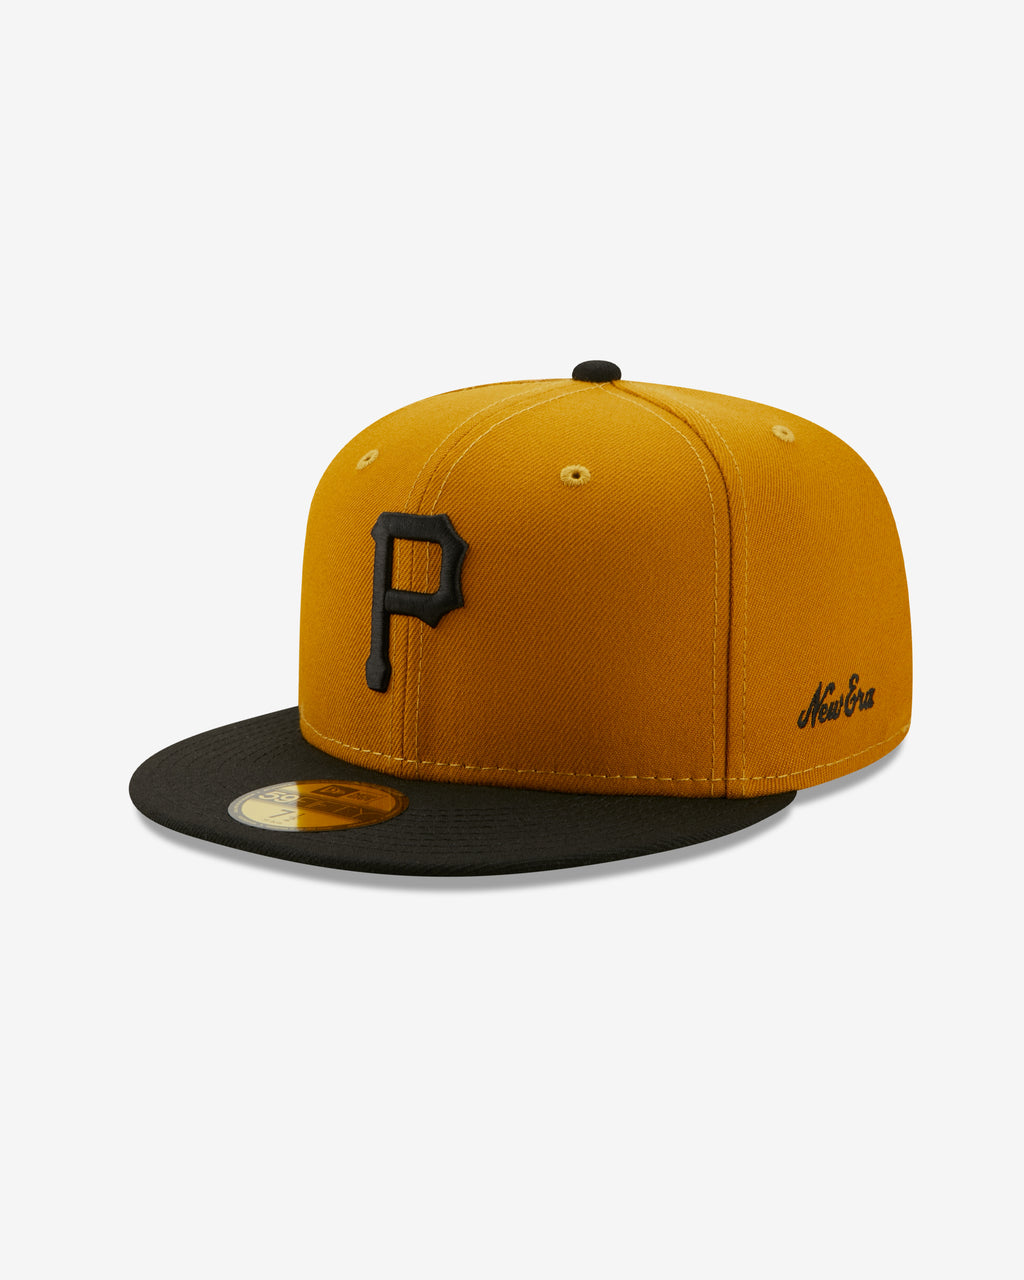 FC Goods on X: #1 The Pittsburgh Pirates The pillbox hats. The